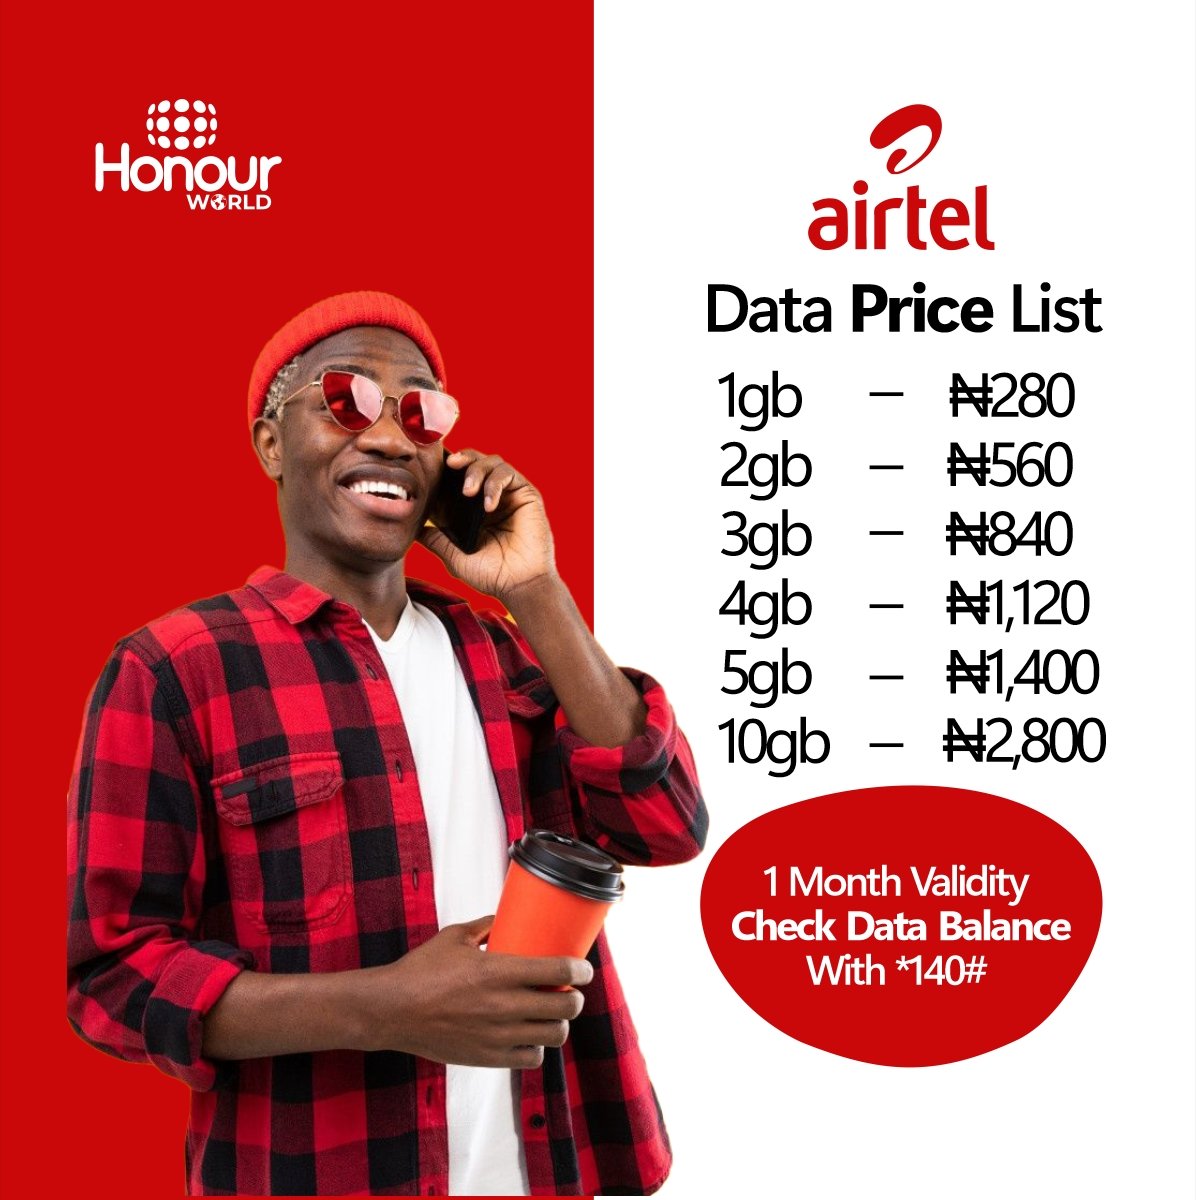 Our Airtel prices are now made available with an additional price slash. Enjoy the yummy experience.

 Download the App on playstore 👇
play.google.com/store/apps/det…

PeterObiAt61, MaskEXAfrica, NNPC,KoundeIsBlue,HappyBirthdayPeterObi, John Doe, MUNCRY, Super Falcons, Bola Ahmed